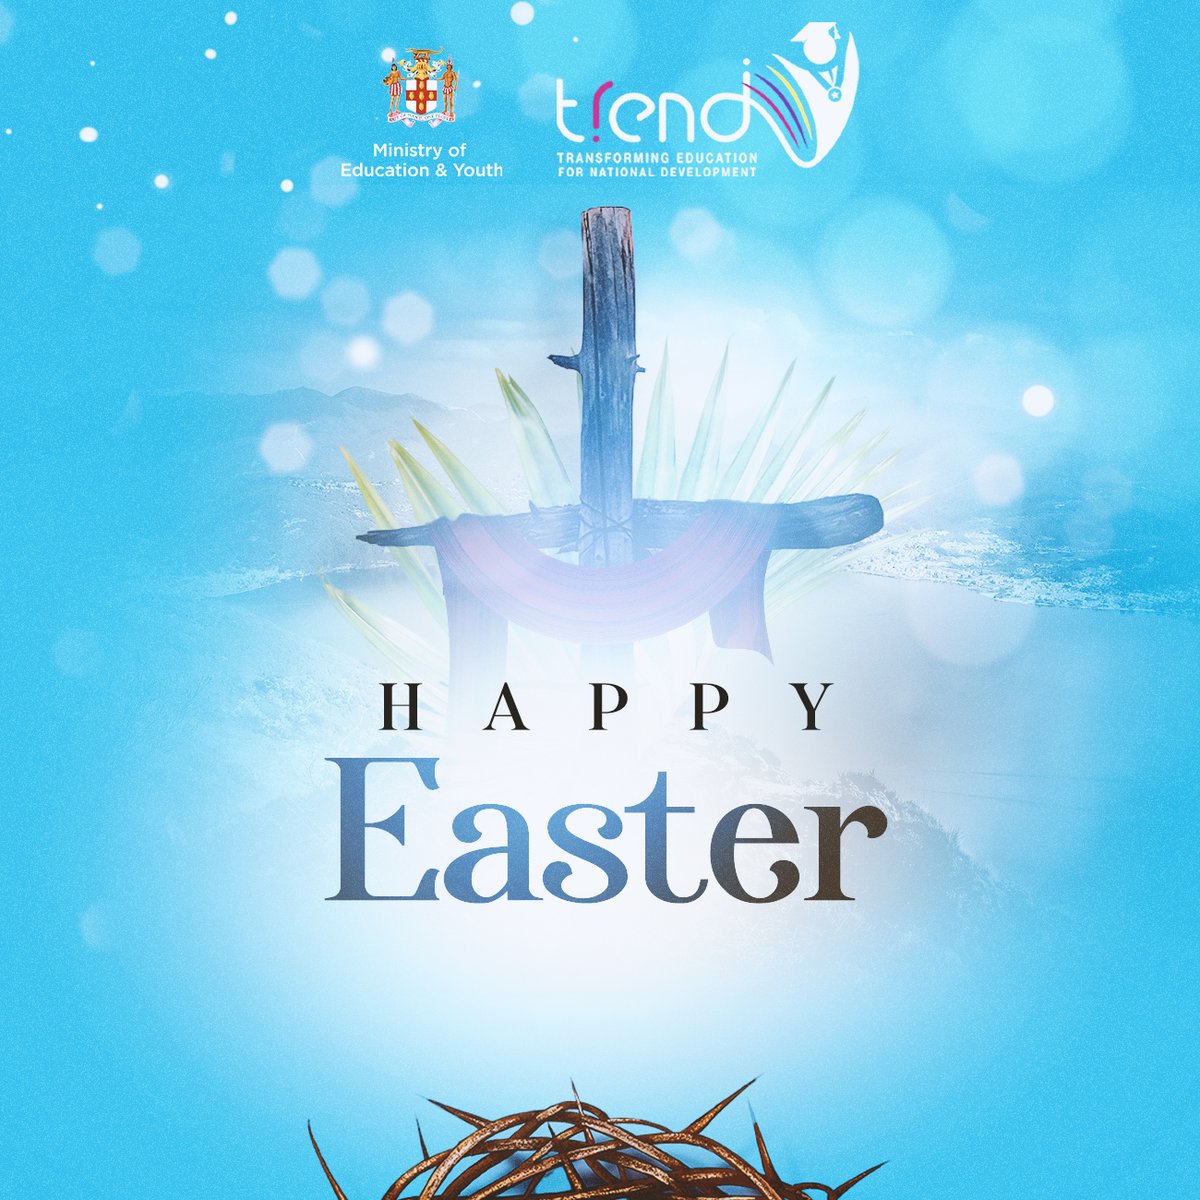 Let us celebrate new beginnings and cherish precious moments with loved ones. The Ministry of Education and Youth is wishing you a wonderful Easter filled with blessings and happiness. #TREND #TRENDEduJa #Easter